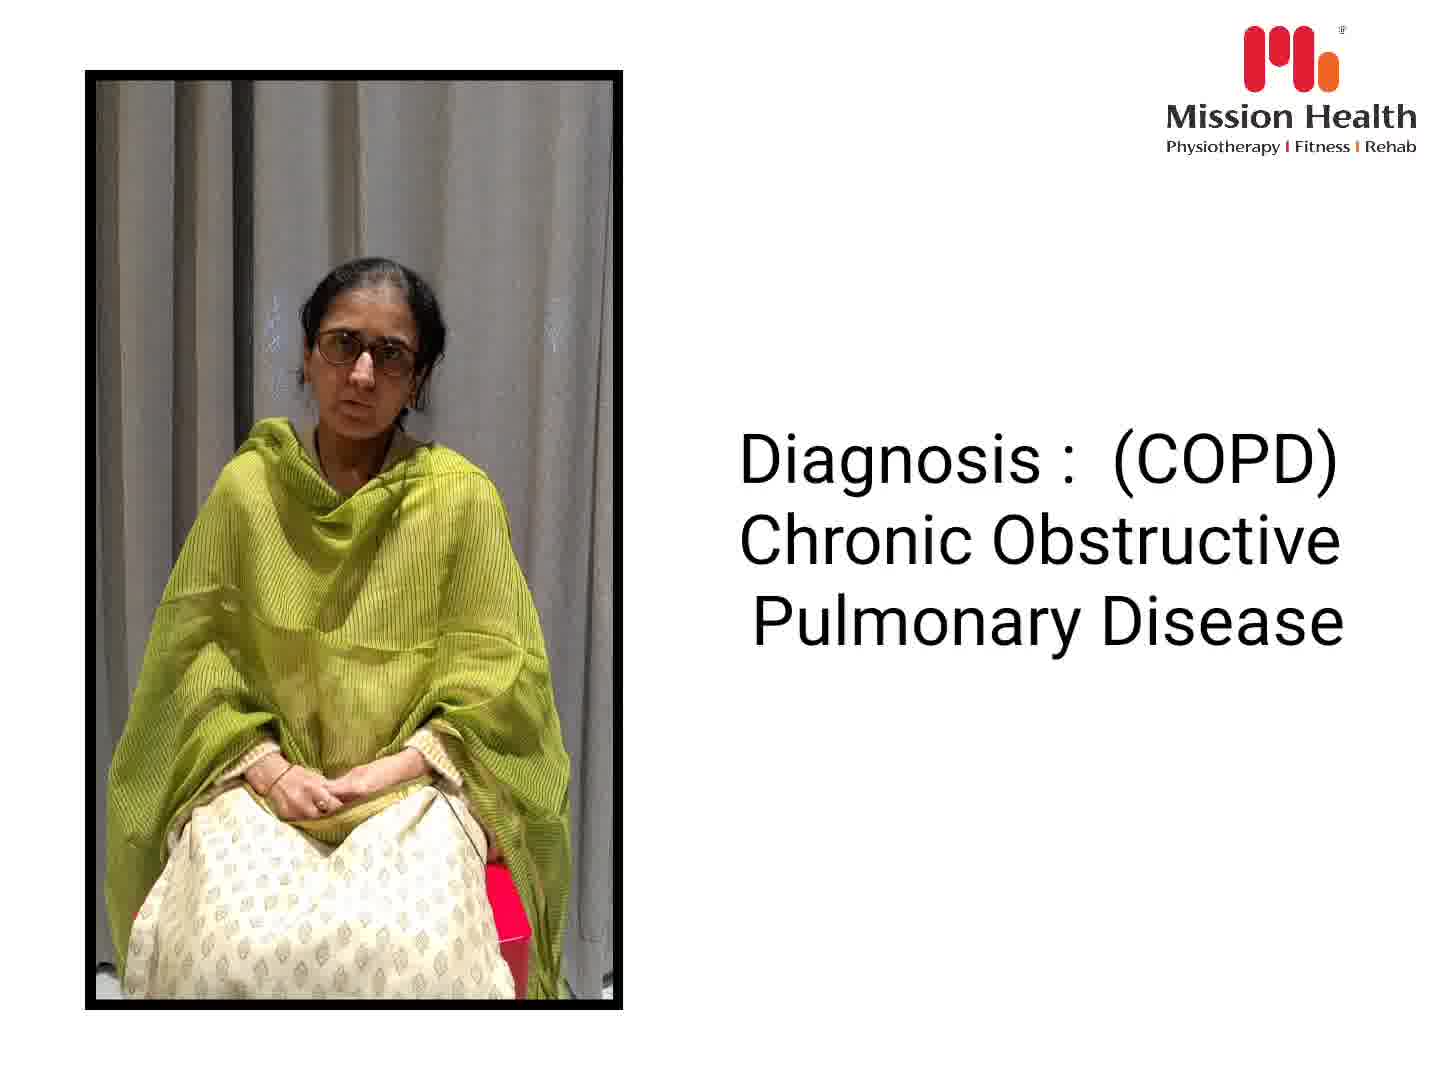 Mrs. Urmi Sheth was having trouble breathing while performing her day to day activities such as walking or talking.

With a reduced oxygen saturation she was forced to carry oxygen support with her even while performing basic tasks.

After proper Pulmonary and Cardiac Rehabilitation along with strength and endurance training she has now managed to regain her normal oxygen levels and perform  her activities of daily living.

She shares her journey at Mission Health with us.

Call : +91 63562 63562
Visit : www.missionhealth.co.in

#missionhealthfamily 
#missionhealthfeedback 
#missionhealthtestimonial 
#MissionHealth 
#missionhealthindia 
#bestphysiotherapyclinicinahmedabad 
#testimonial 
#mhfamily 
#cardiopulmonary 
#pulmonary 
#spo2 
#explorepage✨ 
#awareness 
#instareels 
#reelsinstagram 
#reelitfeelit 
#reelkarofeelkaro 
#viralpost 
#viralvideos 
#instagramreels